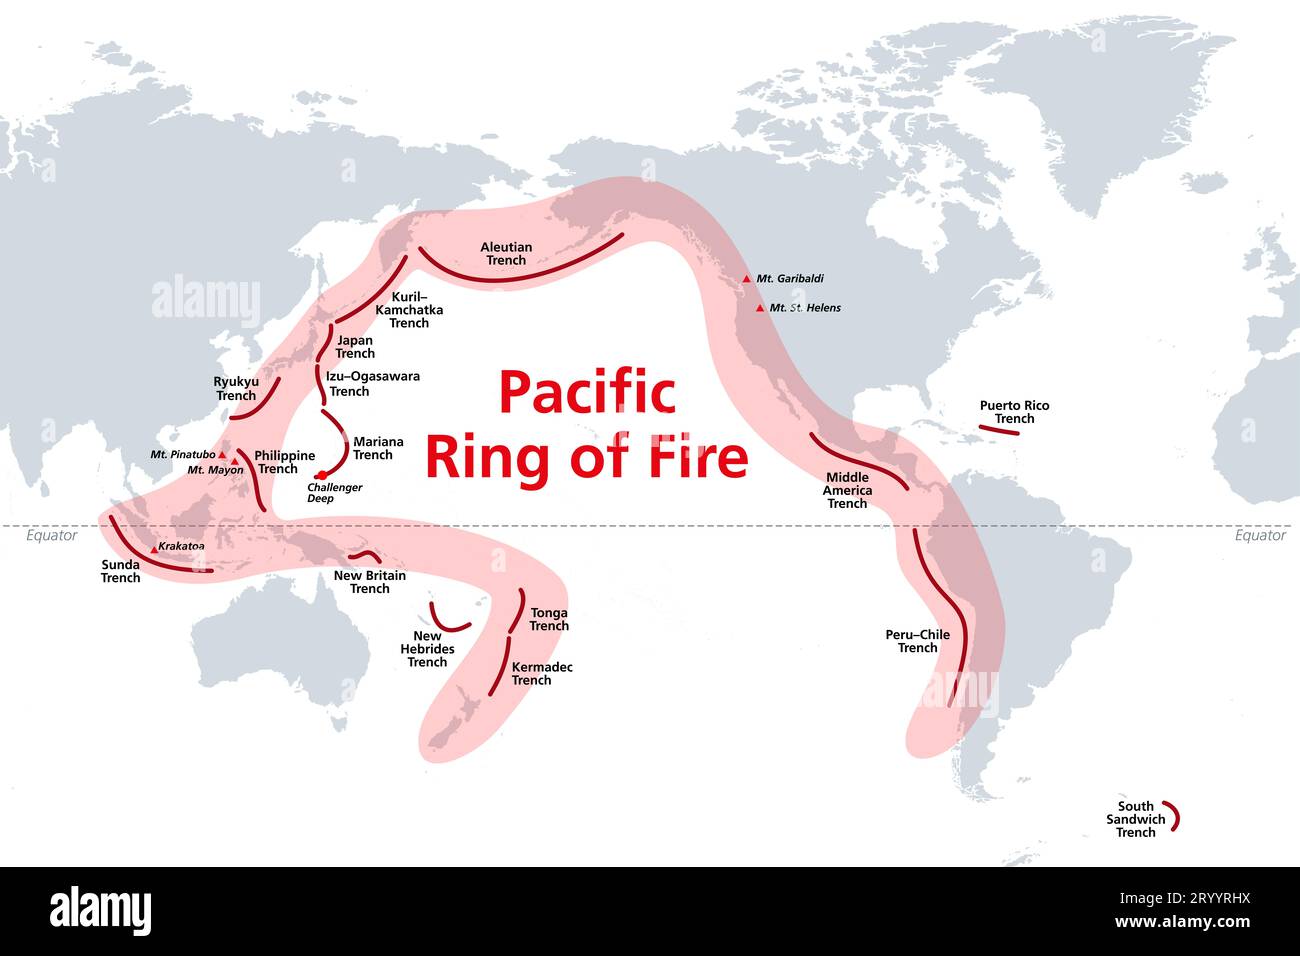 The Pacific Ring of Fire: Why is Japan susceptible to periodic earthquakes?